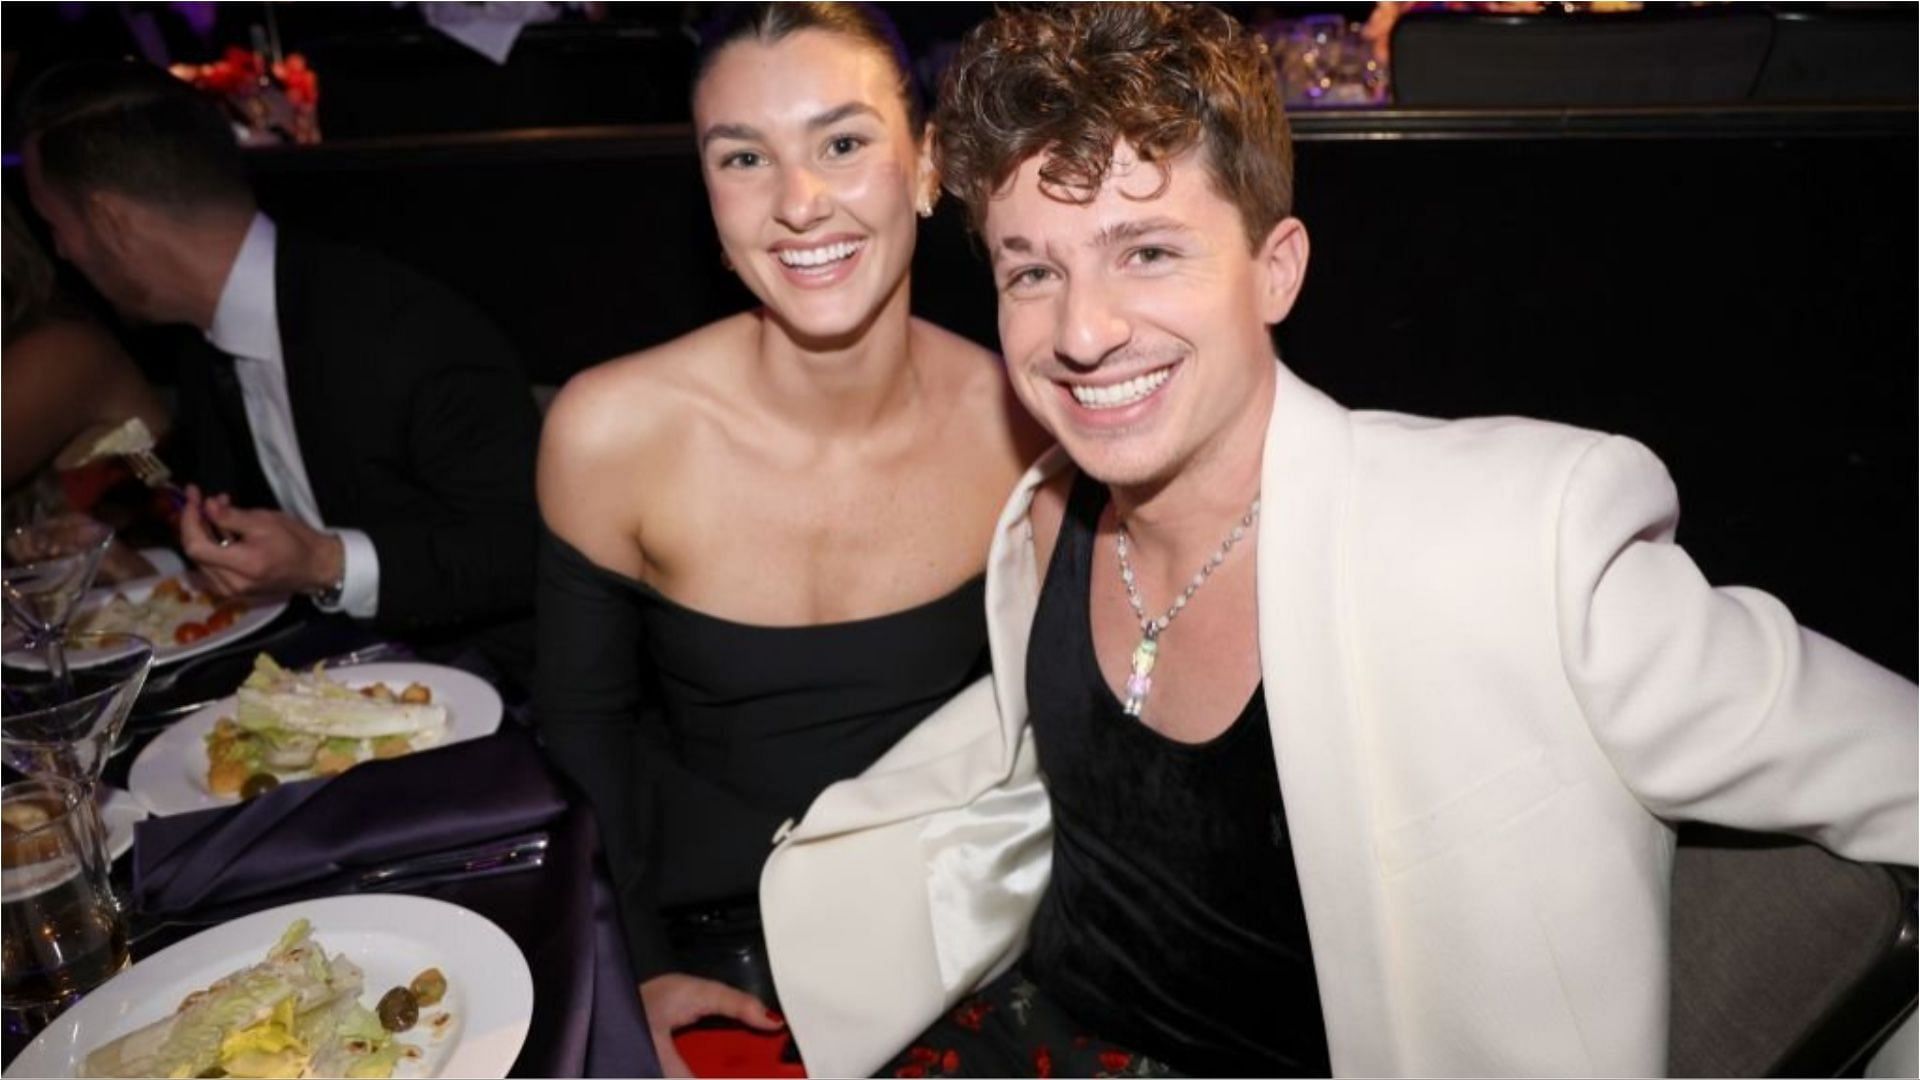 Charlie Puth and Brooke Sansone are engaged now (Image via Johnny Nunez/Getty Images)